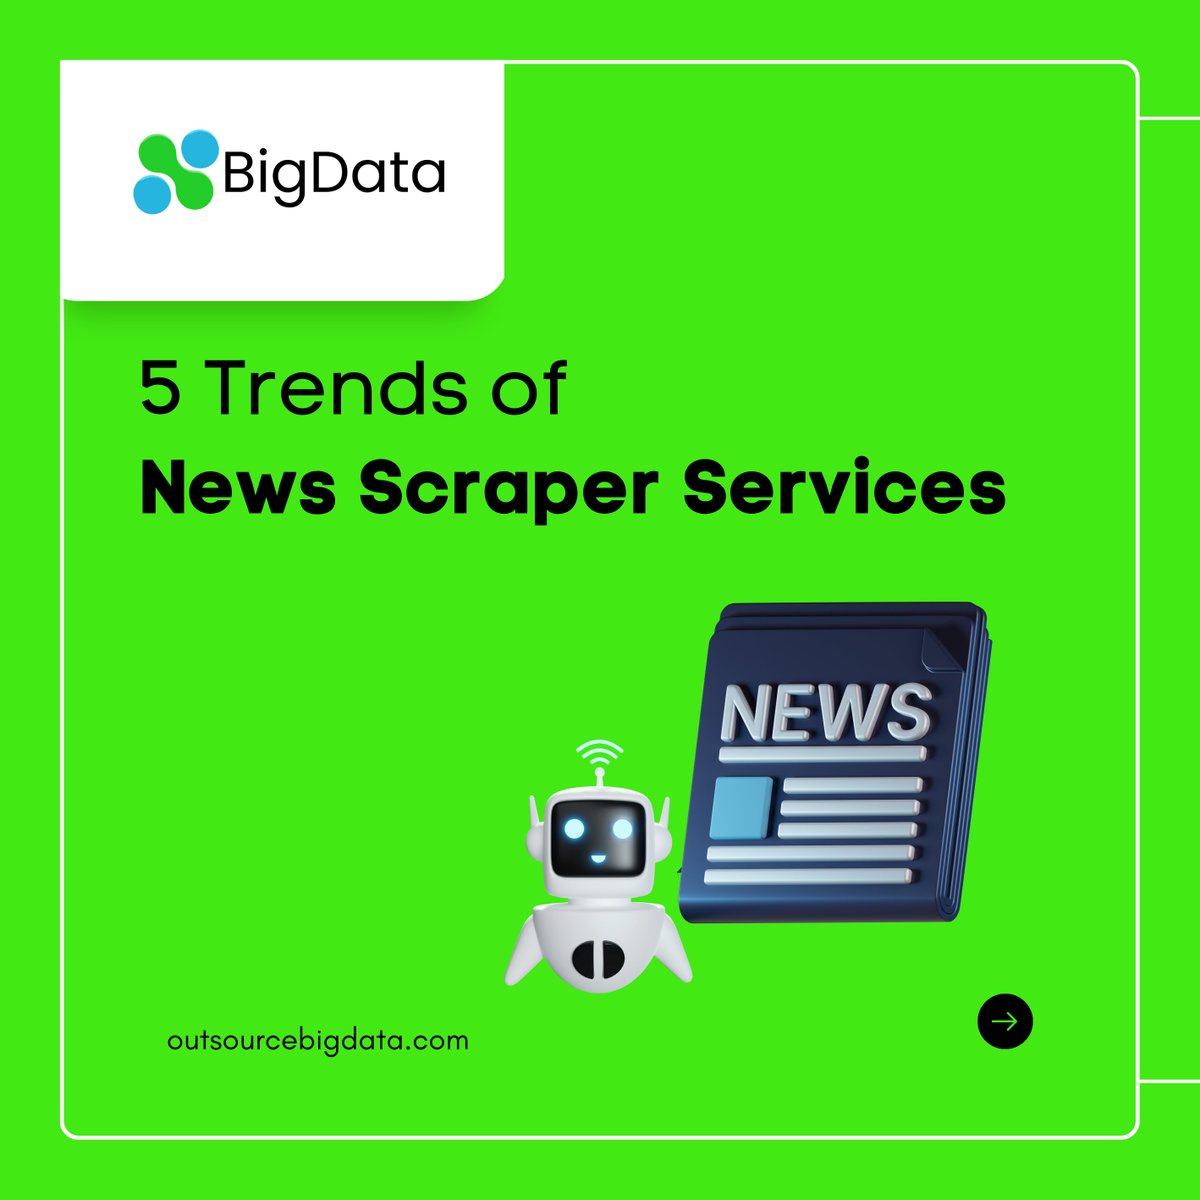 5 Trends of News Scraper Services.

Read More about them from the link in the comment.

#newscaraper #newsdata #news #newsupdate
 #gdpr #deeperlearning #machinelearningalgorithms #deeplearningmachine #machinelearningtools #machinelearningengineer #gdprcompliance #technology